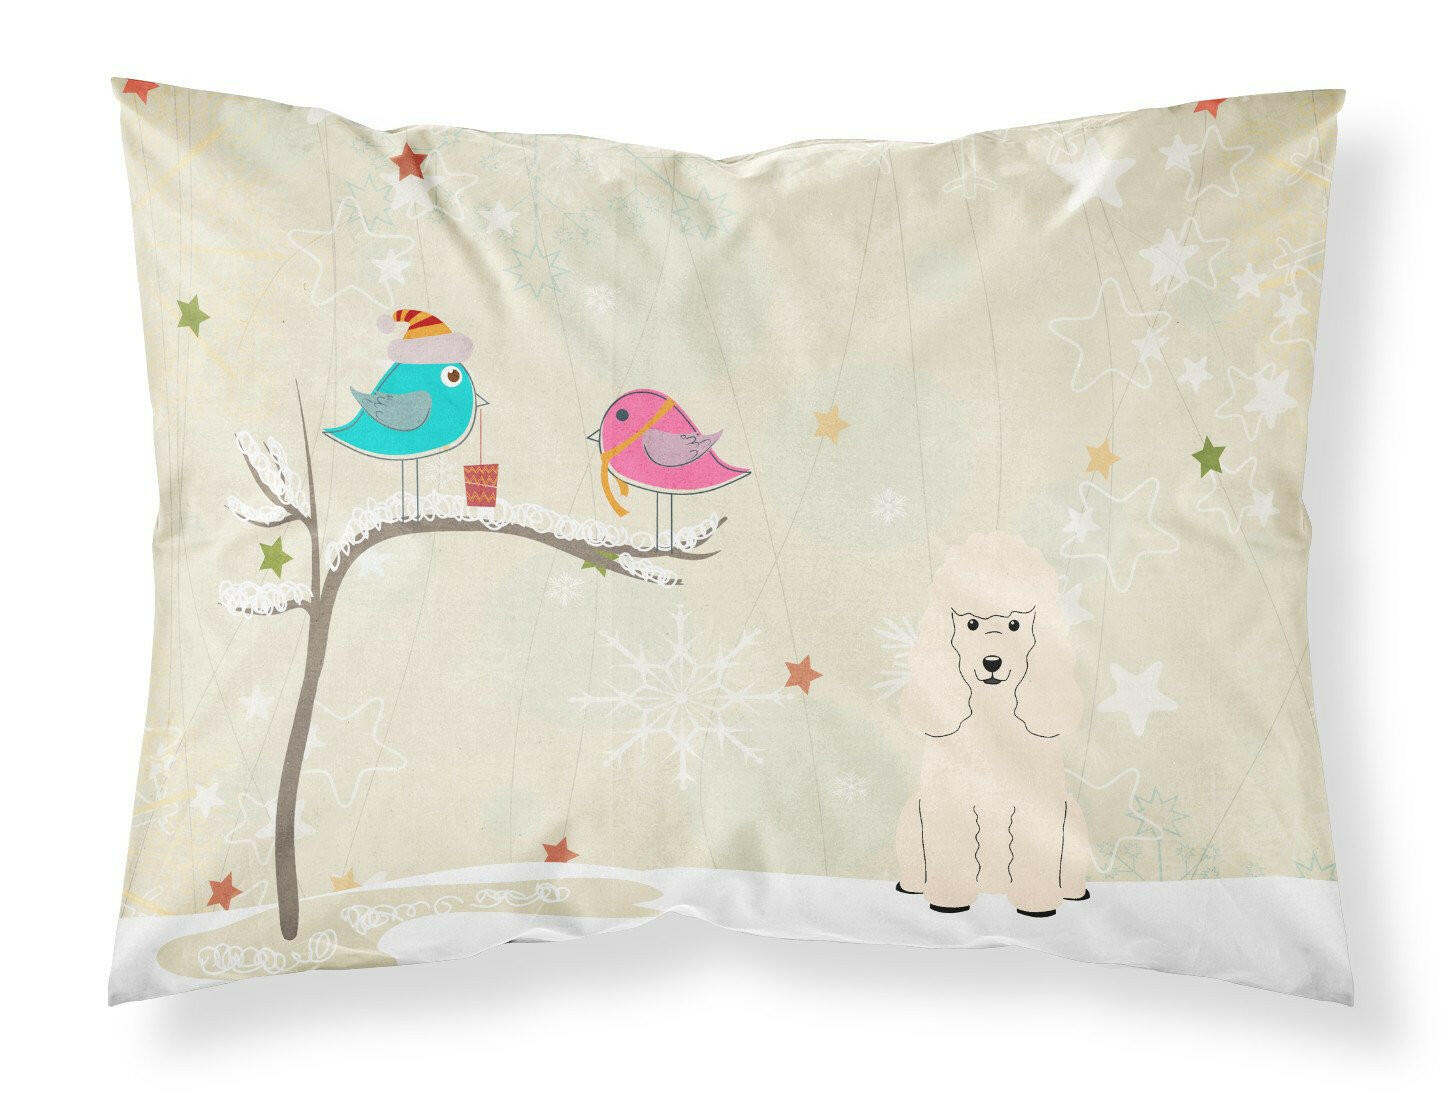 Christmas Presents between Friends Poodle White Fabric Standard Pillowcase BB2542PILLOWCASE by Caroline's Treasures